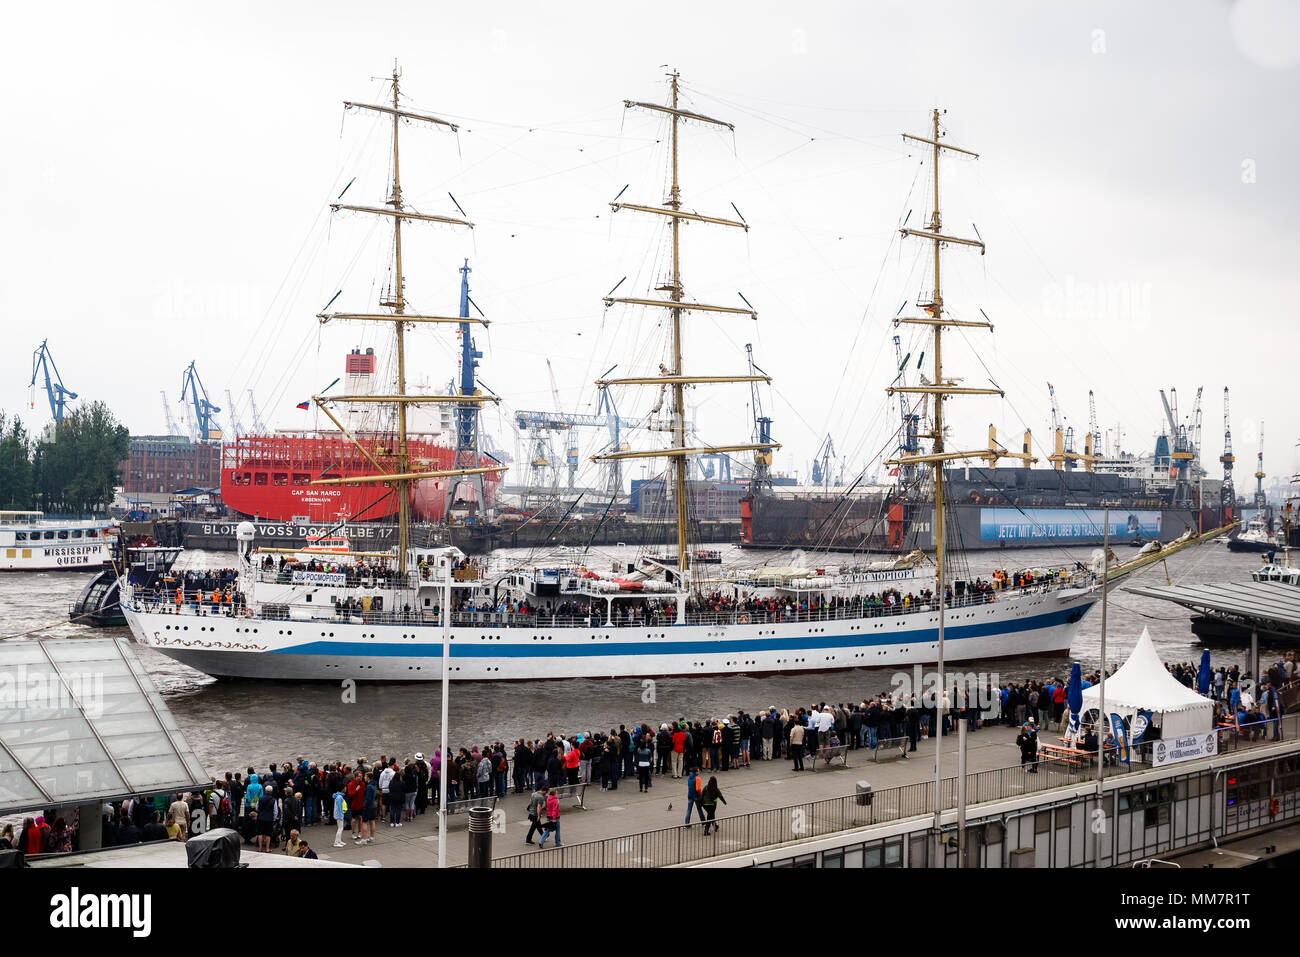 10 May 2018, Germany, Hamburg: Together with more than 100 ships of all sizes, the Russian tall ship parades on the River Elbe for the inauguration of the anniversary of Hamburg's Harbour. Approximately one million visitors are expected to attend the largest Harbour festivity in the world. The festivities will end on 13 May 2018 with a large outlet parade. Photo: Markus Scholz/dpa Stock Photo